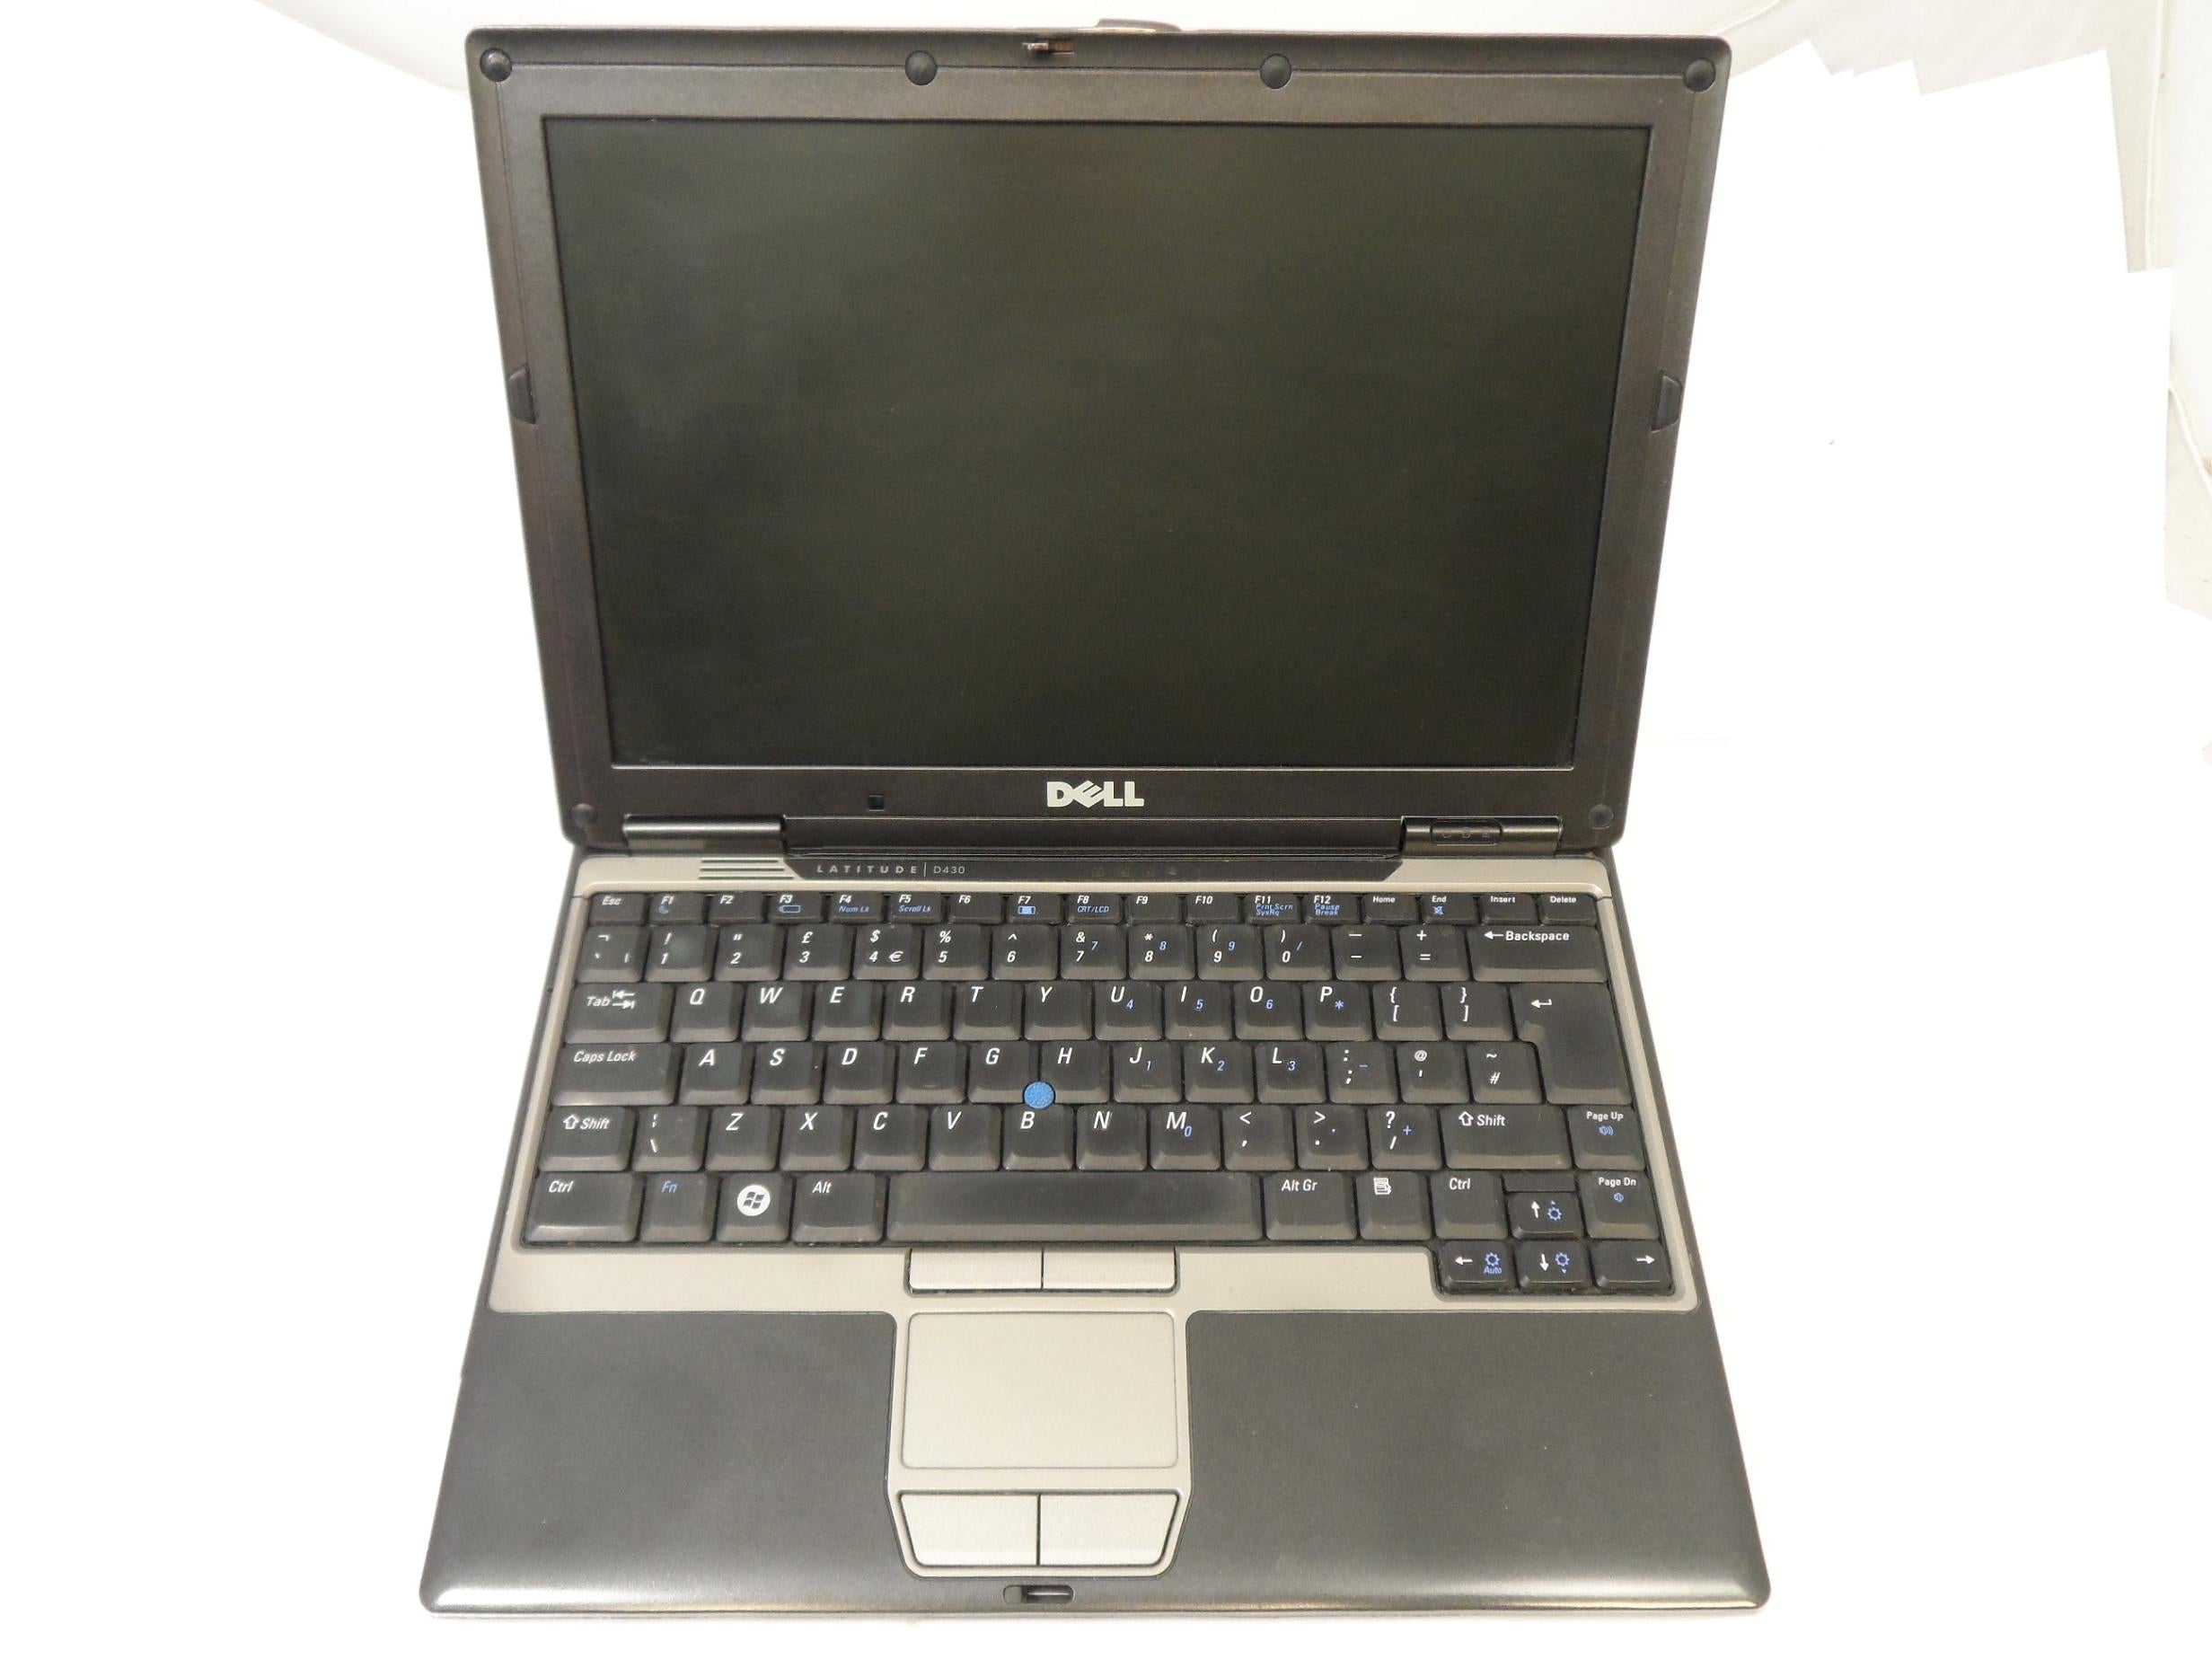 PP09S - Dell Latitude D420 1.2GHz Pentium Core2 Duo Processor 1.5Gb On-Board RAM 80Gb XP Professional Installed HDD Smart Card Reader Bluetooth WiFi - USED